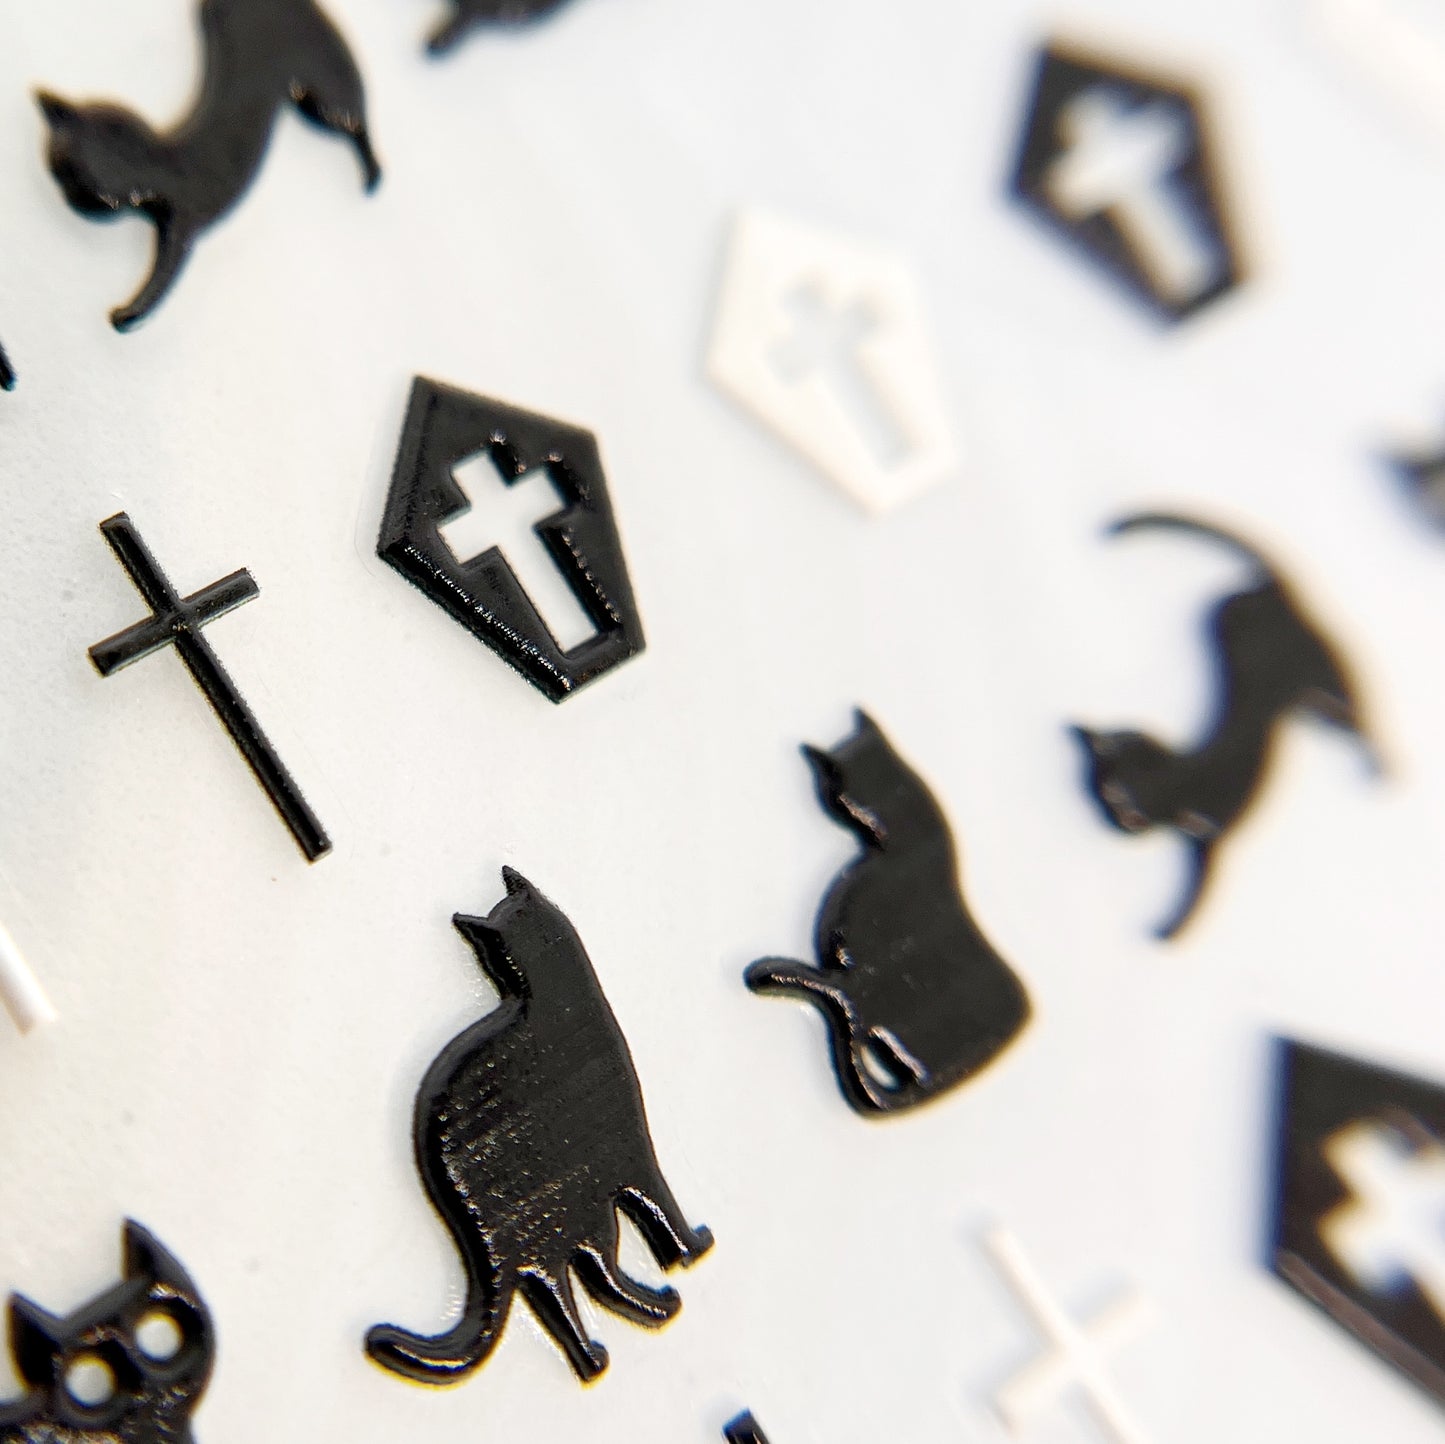 Cats & Coffins Nail Stickers - Embossed Black and White Nail Stickers with Cat, Casket, and Cross Designs, Displayed on White Background.